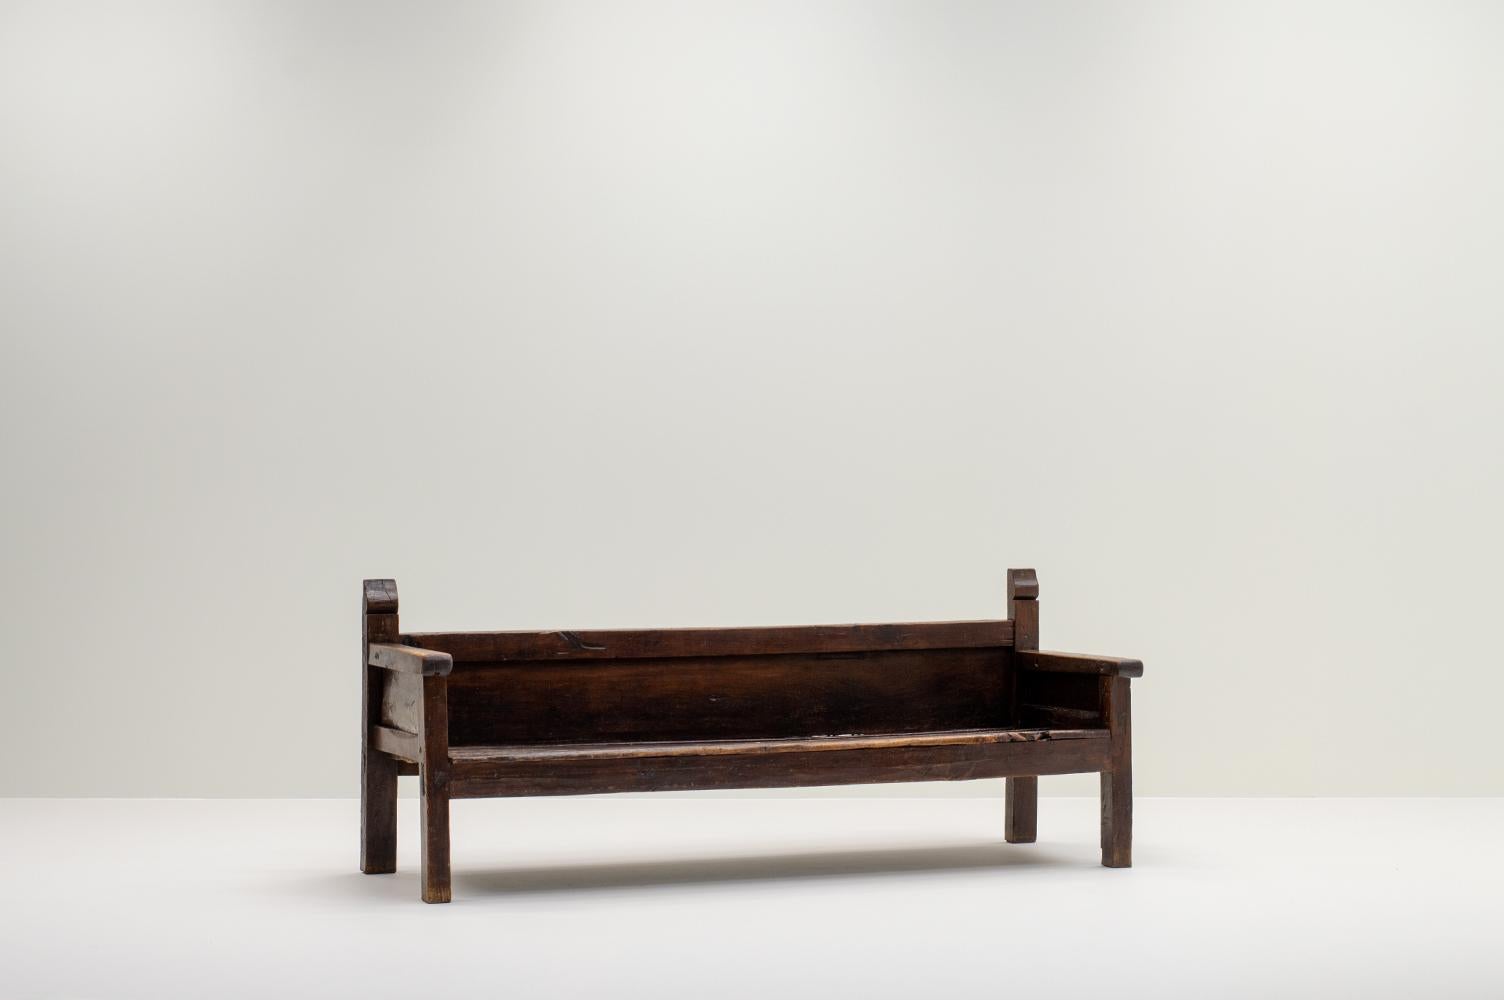 Antique wooden bench, 19th century Spain. Minimalistic handmade bench from the 19th century. The bench has a low back and a deep seat. The color is a dark brown stain and has a beautiful patina. Structurally in good condition. 

.